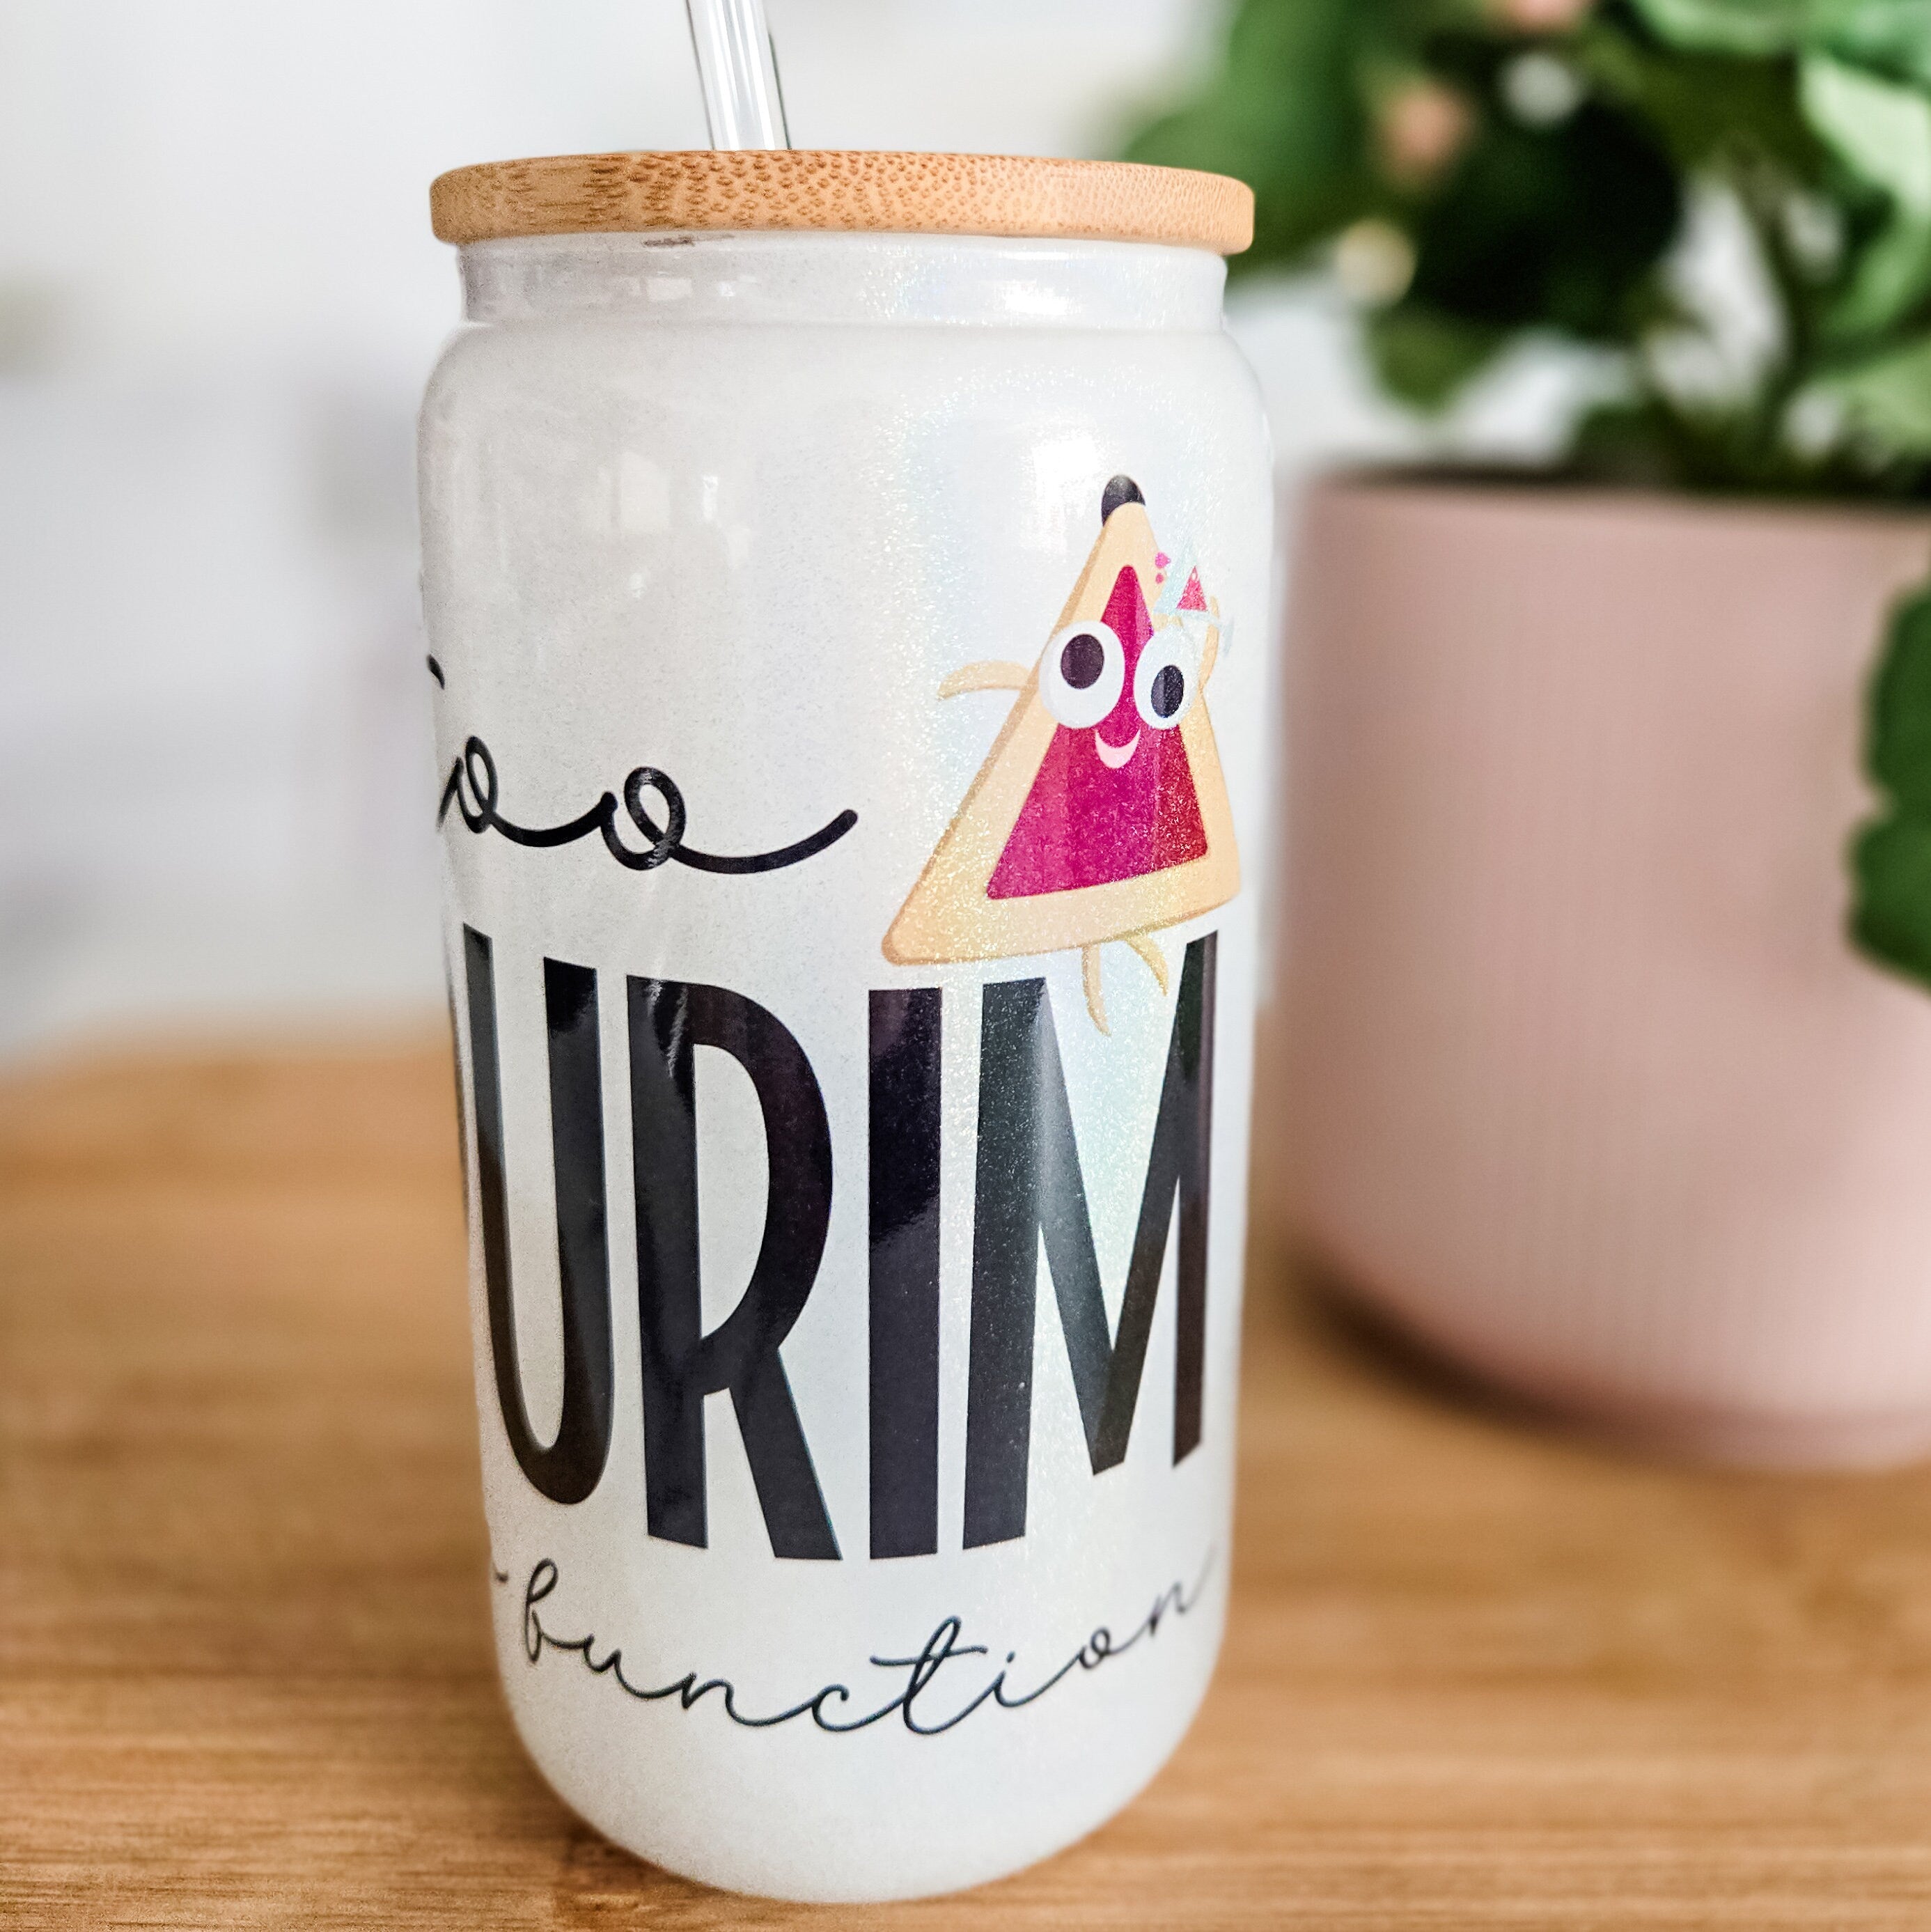 Funny Jewish Humor Wine Cup for Purim Party Salt and Sparkle